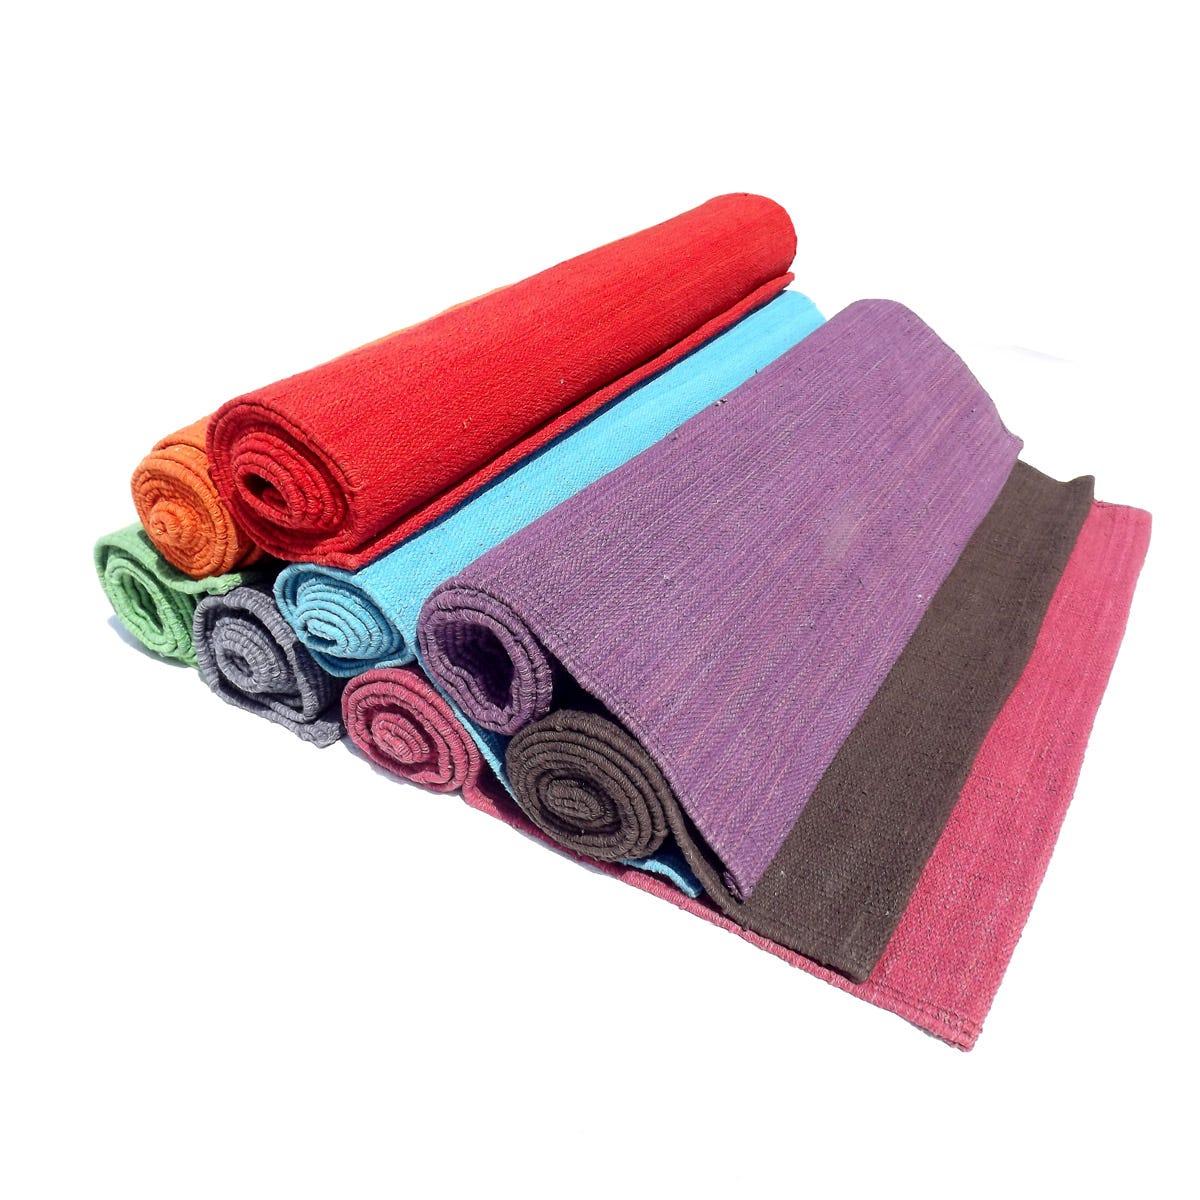 Know 5 essential benefits of using Cotton Yoga Mat, by Clonko Products